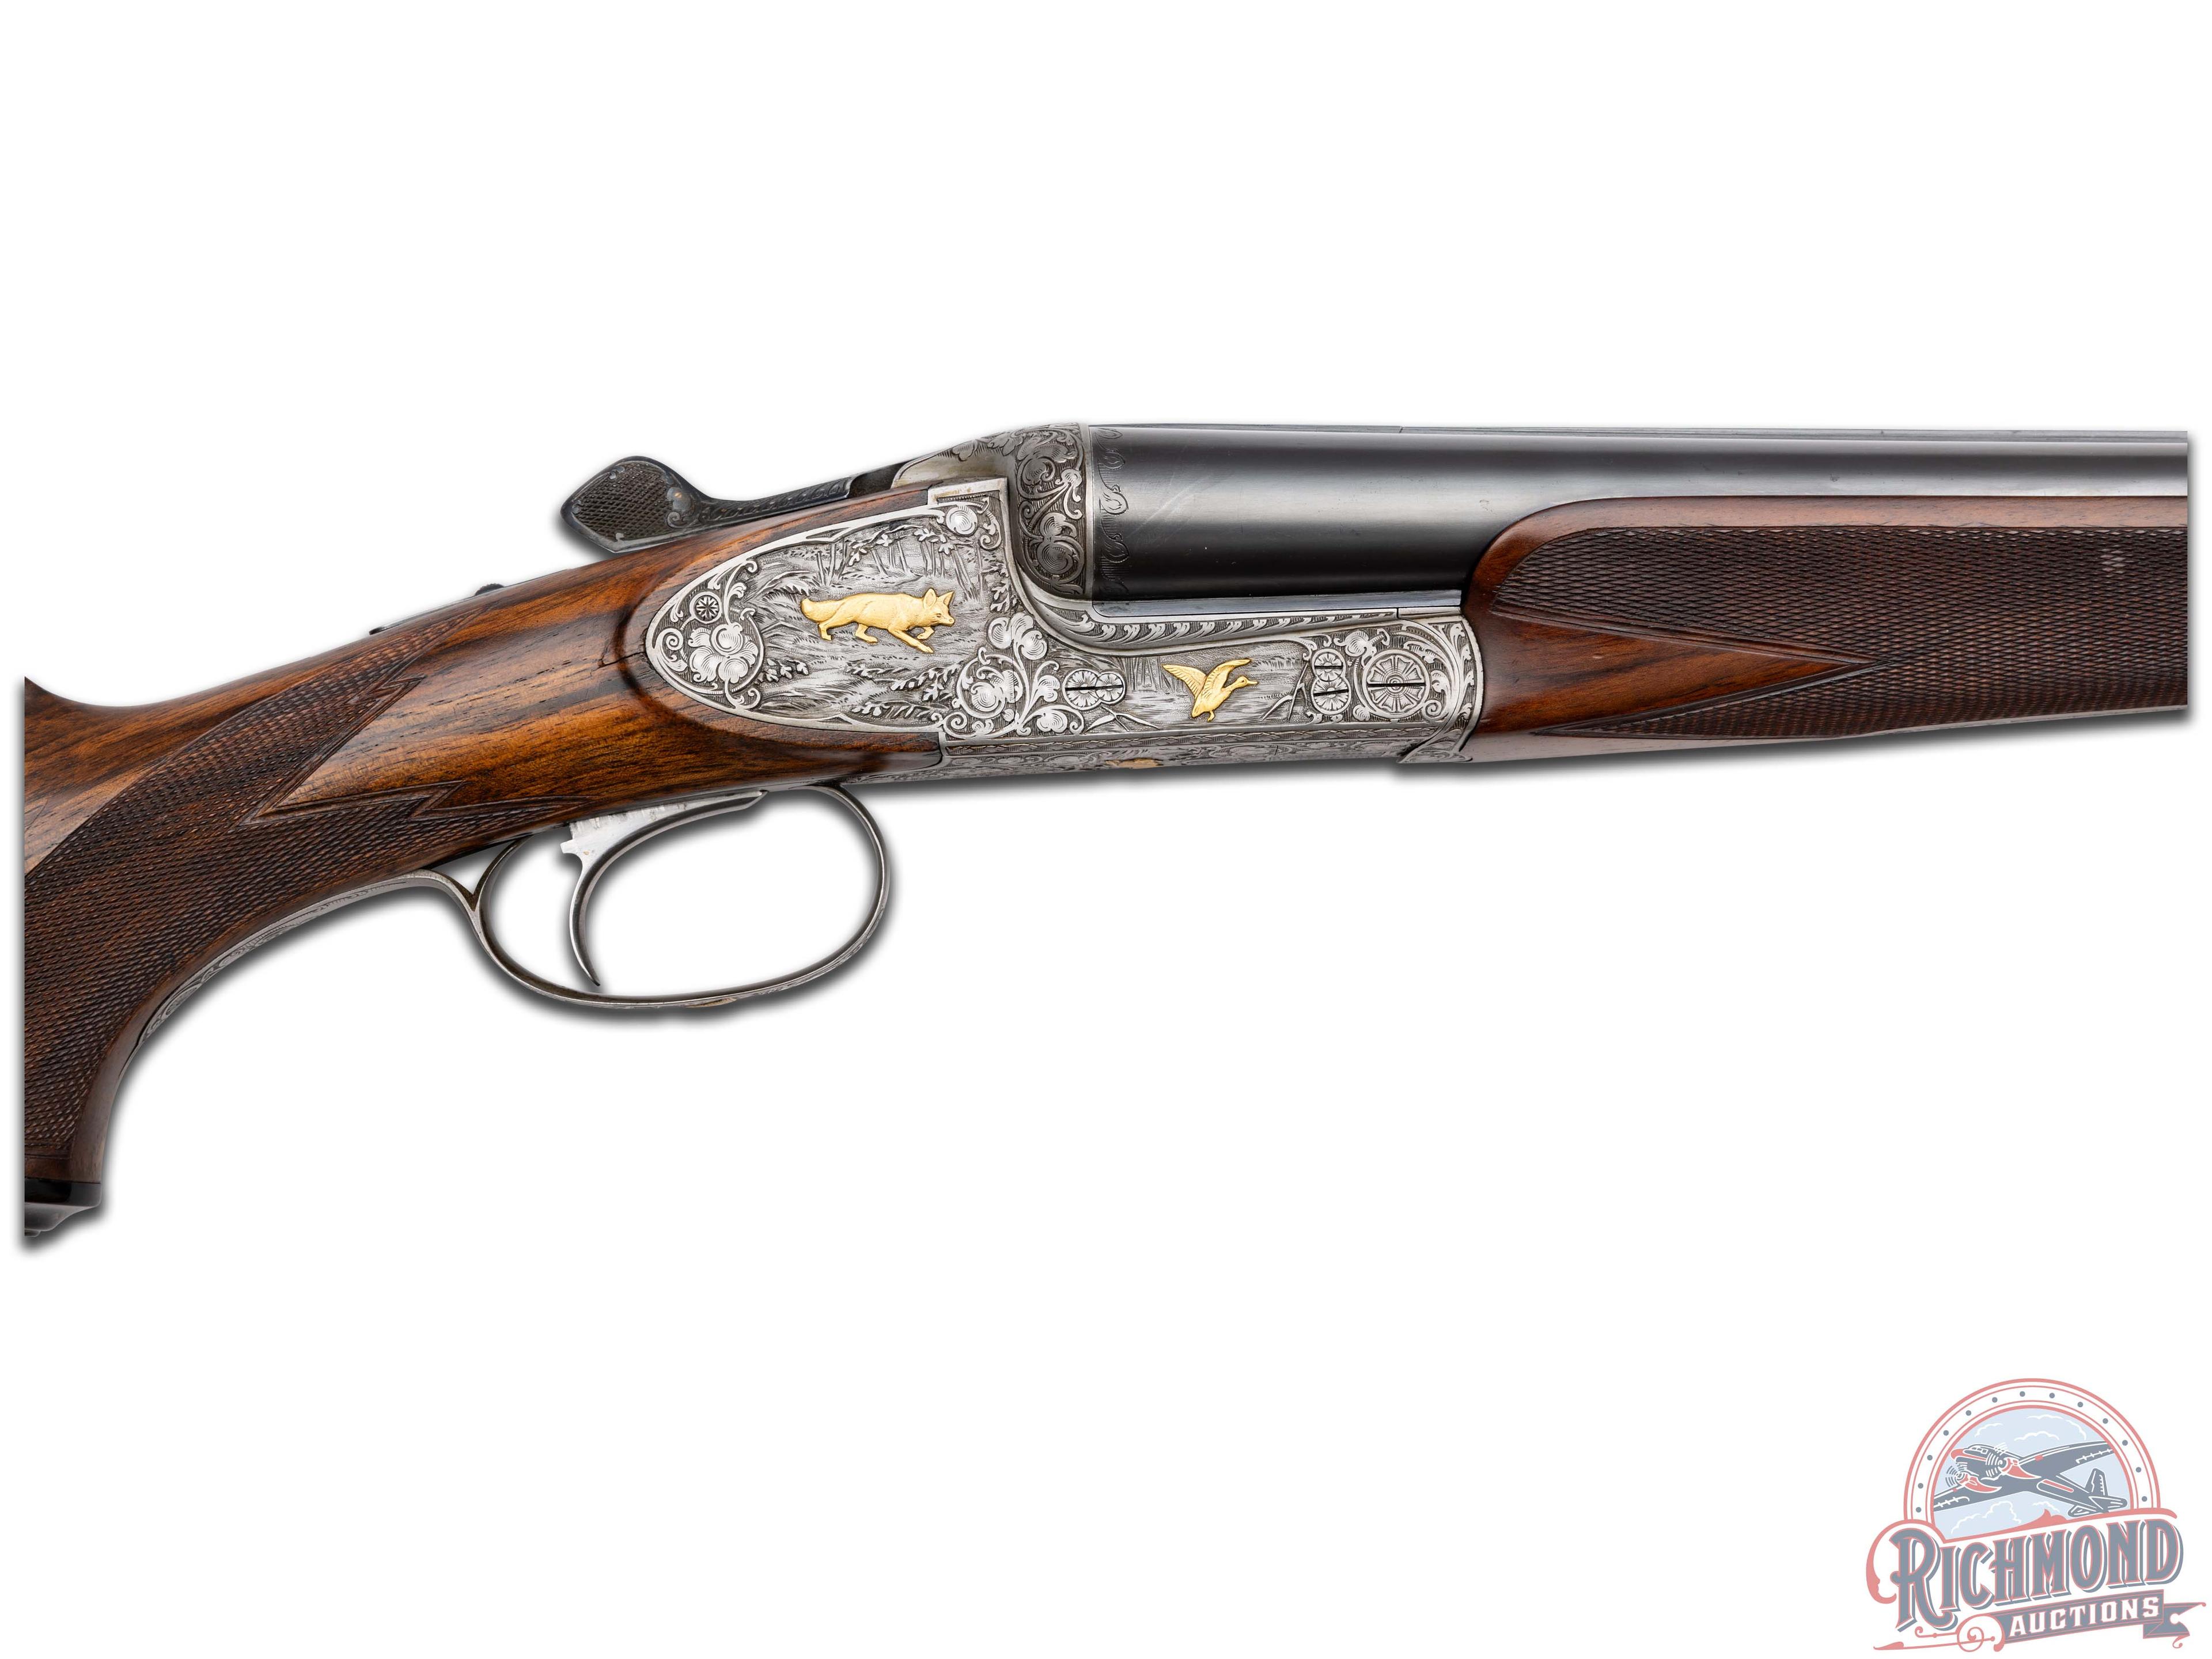 Finely Engraved 1959 Ferlach Sidedplated 12 Gauge Boxlock Double Barrel Game Shotgun with Case